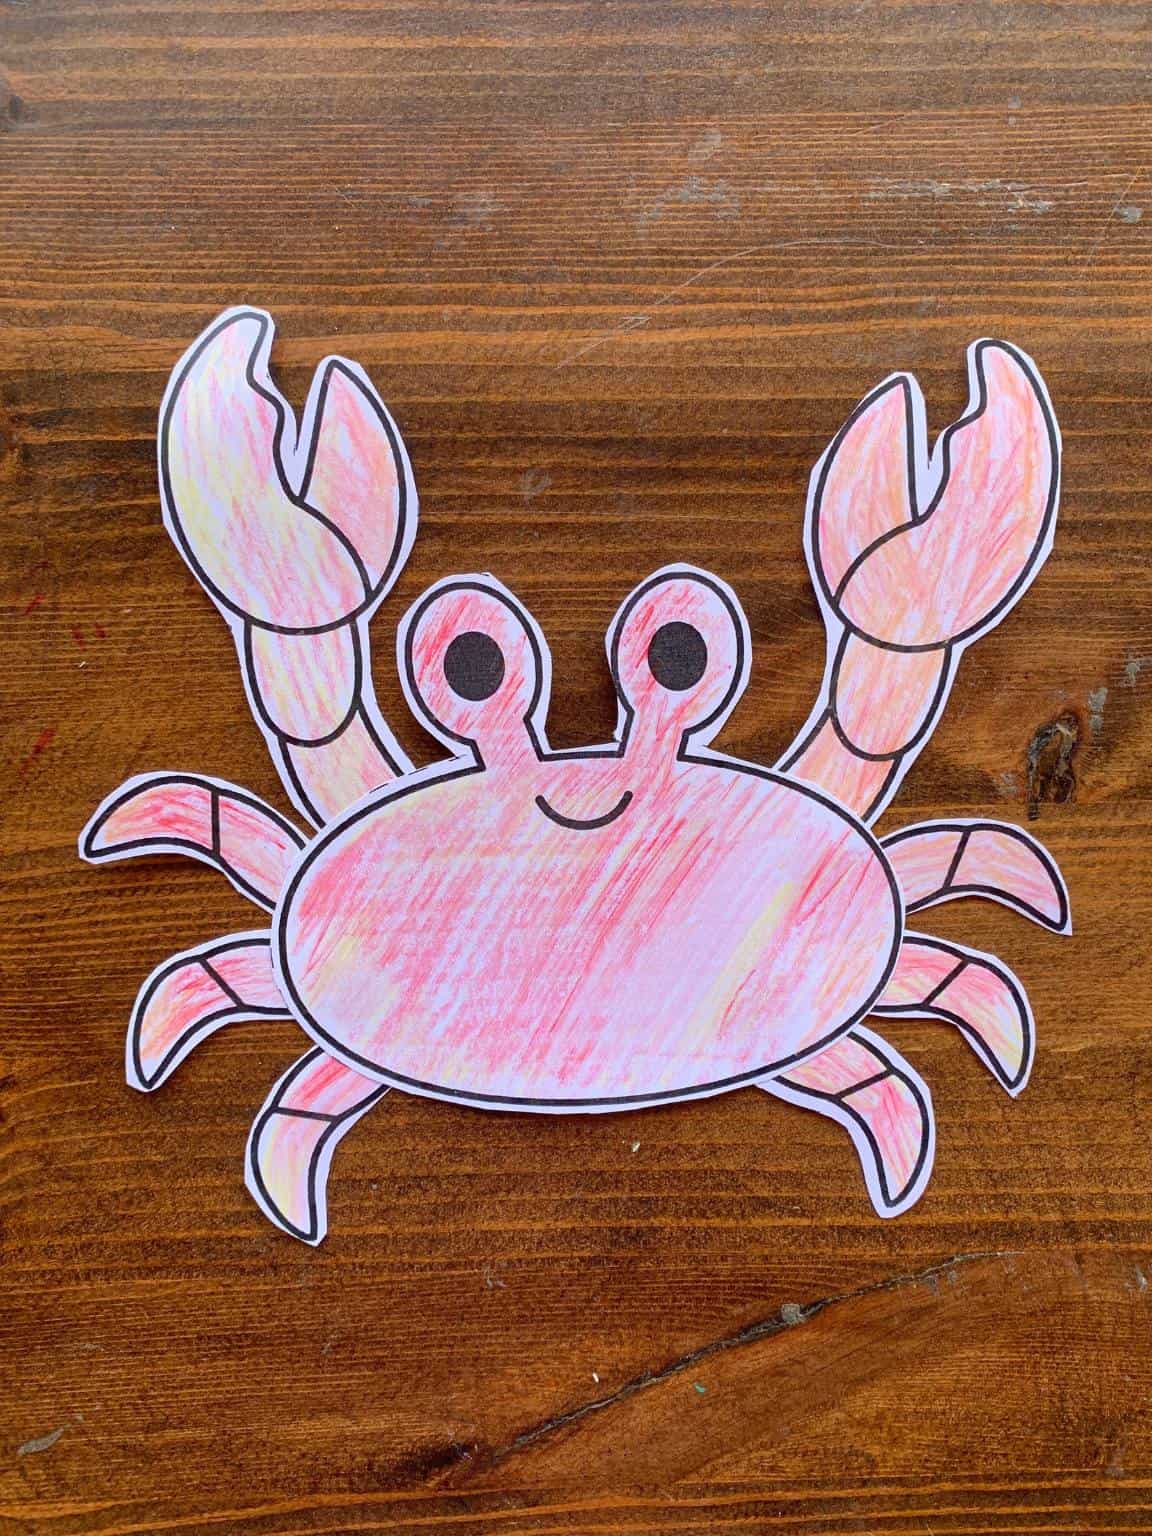 A completed cut and paste crab craft for kids